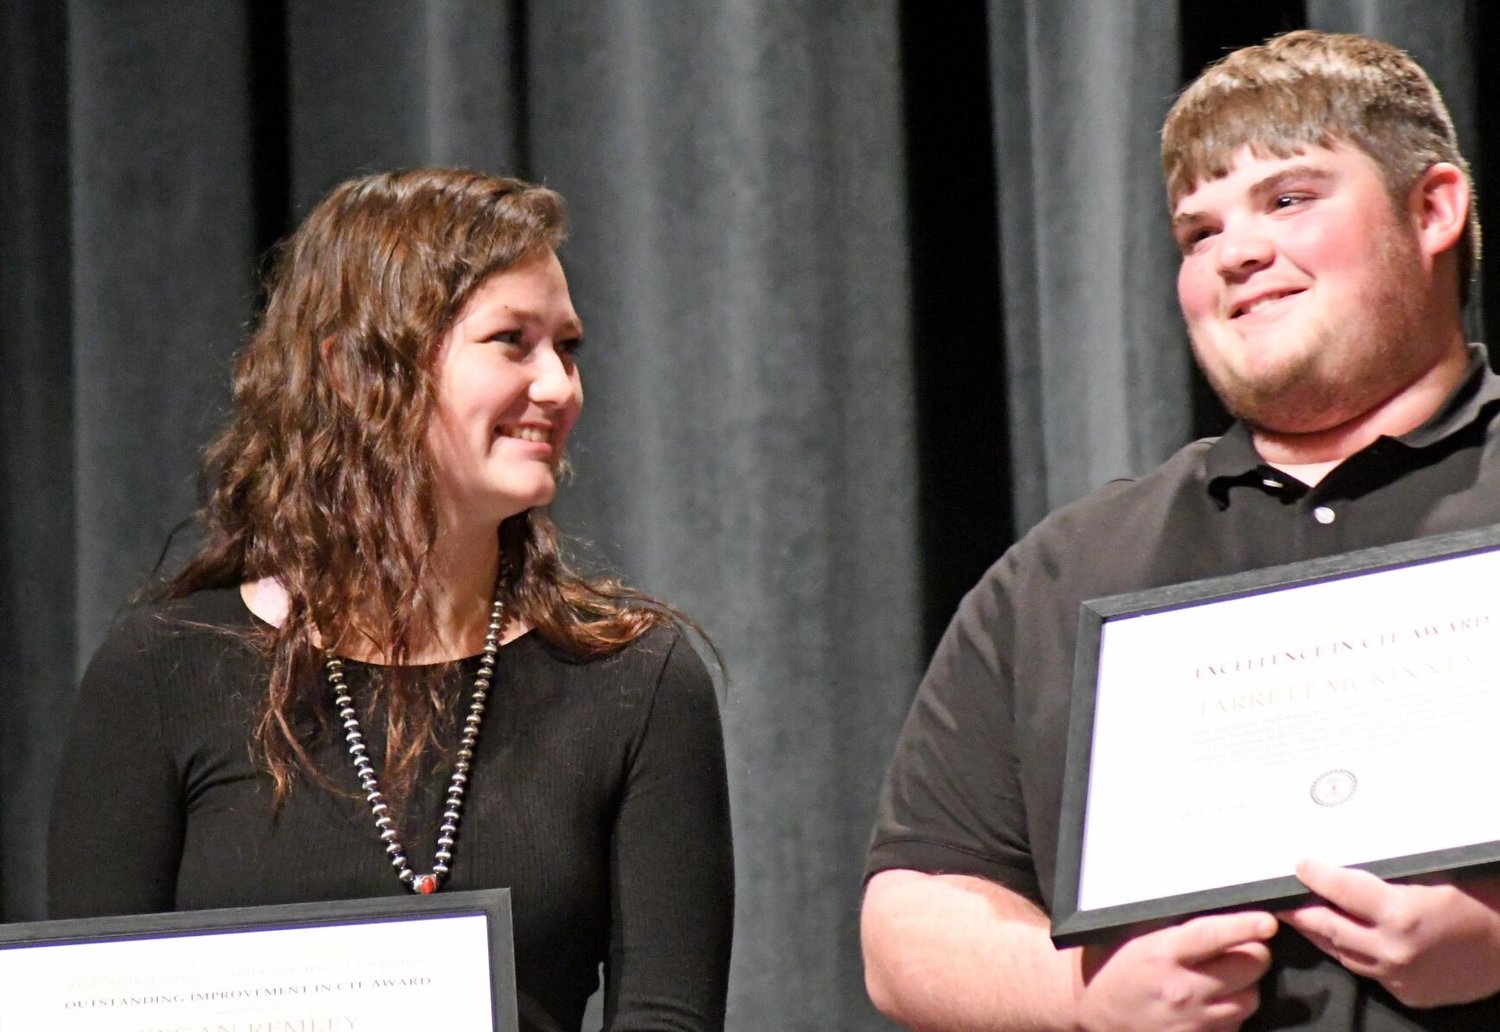 South Montgomery High School students Regan Remley and Jarrett McKinney receive awards for outstanding improvement and excellence in CTE, respectively.